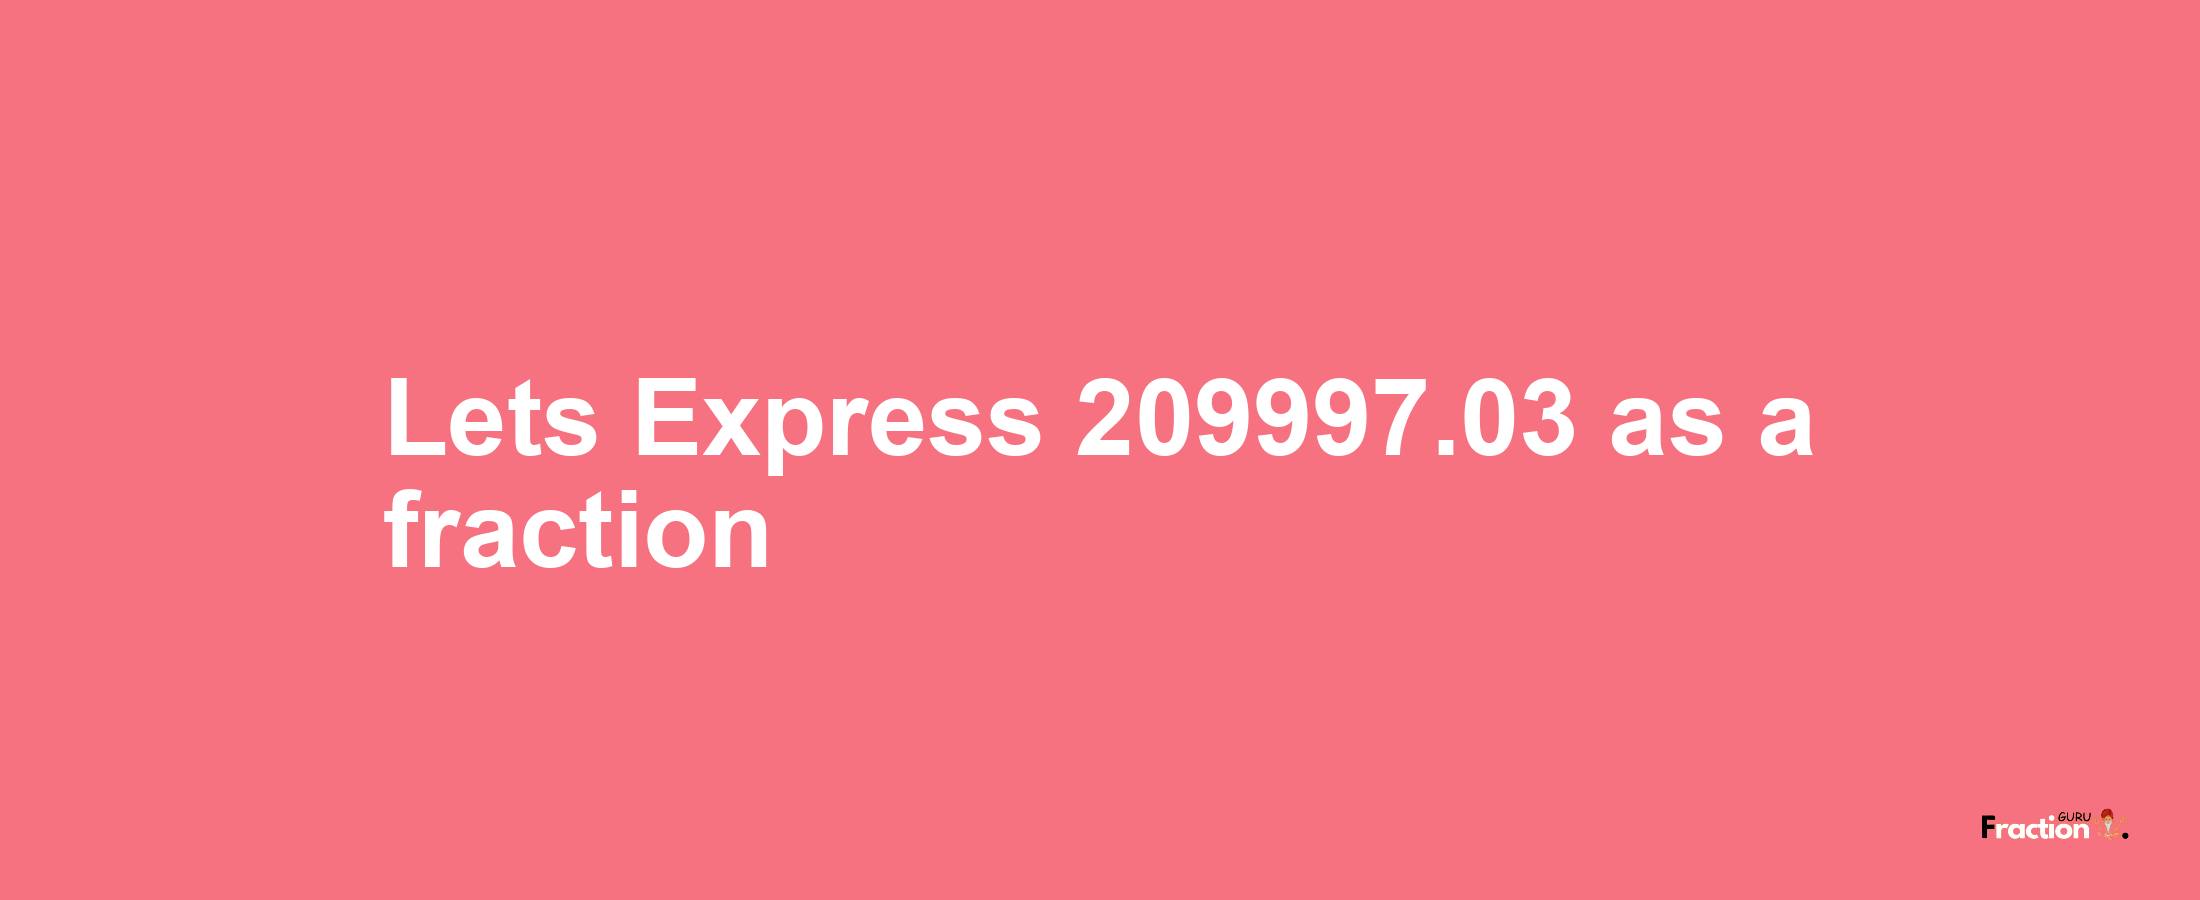 Lets Express 209997.03 as afraction